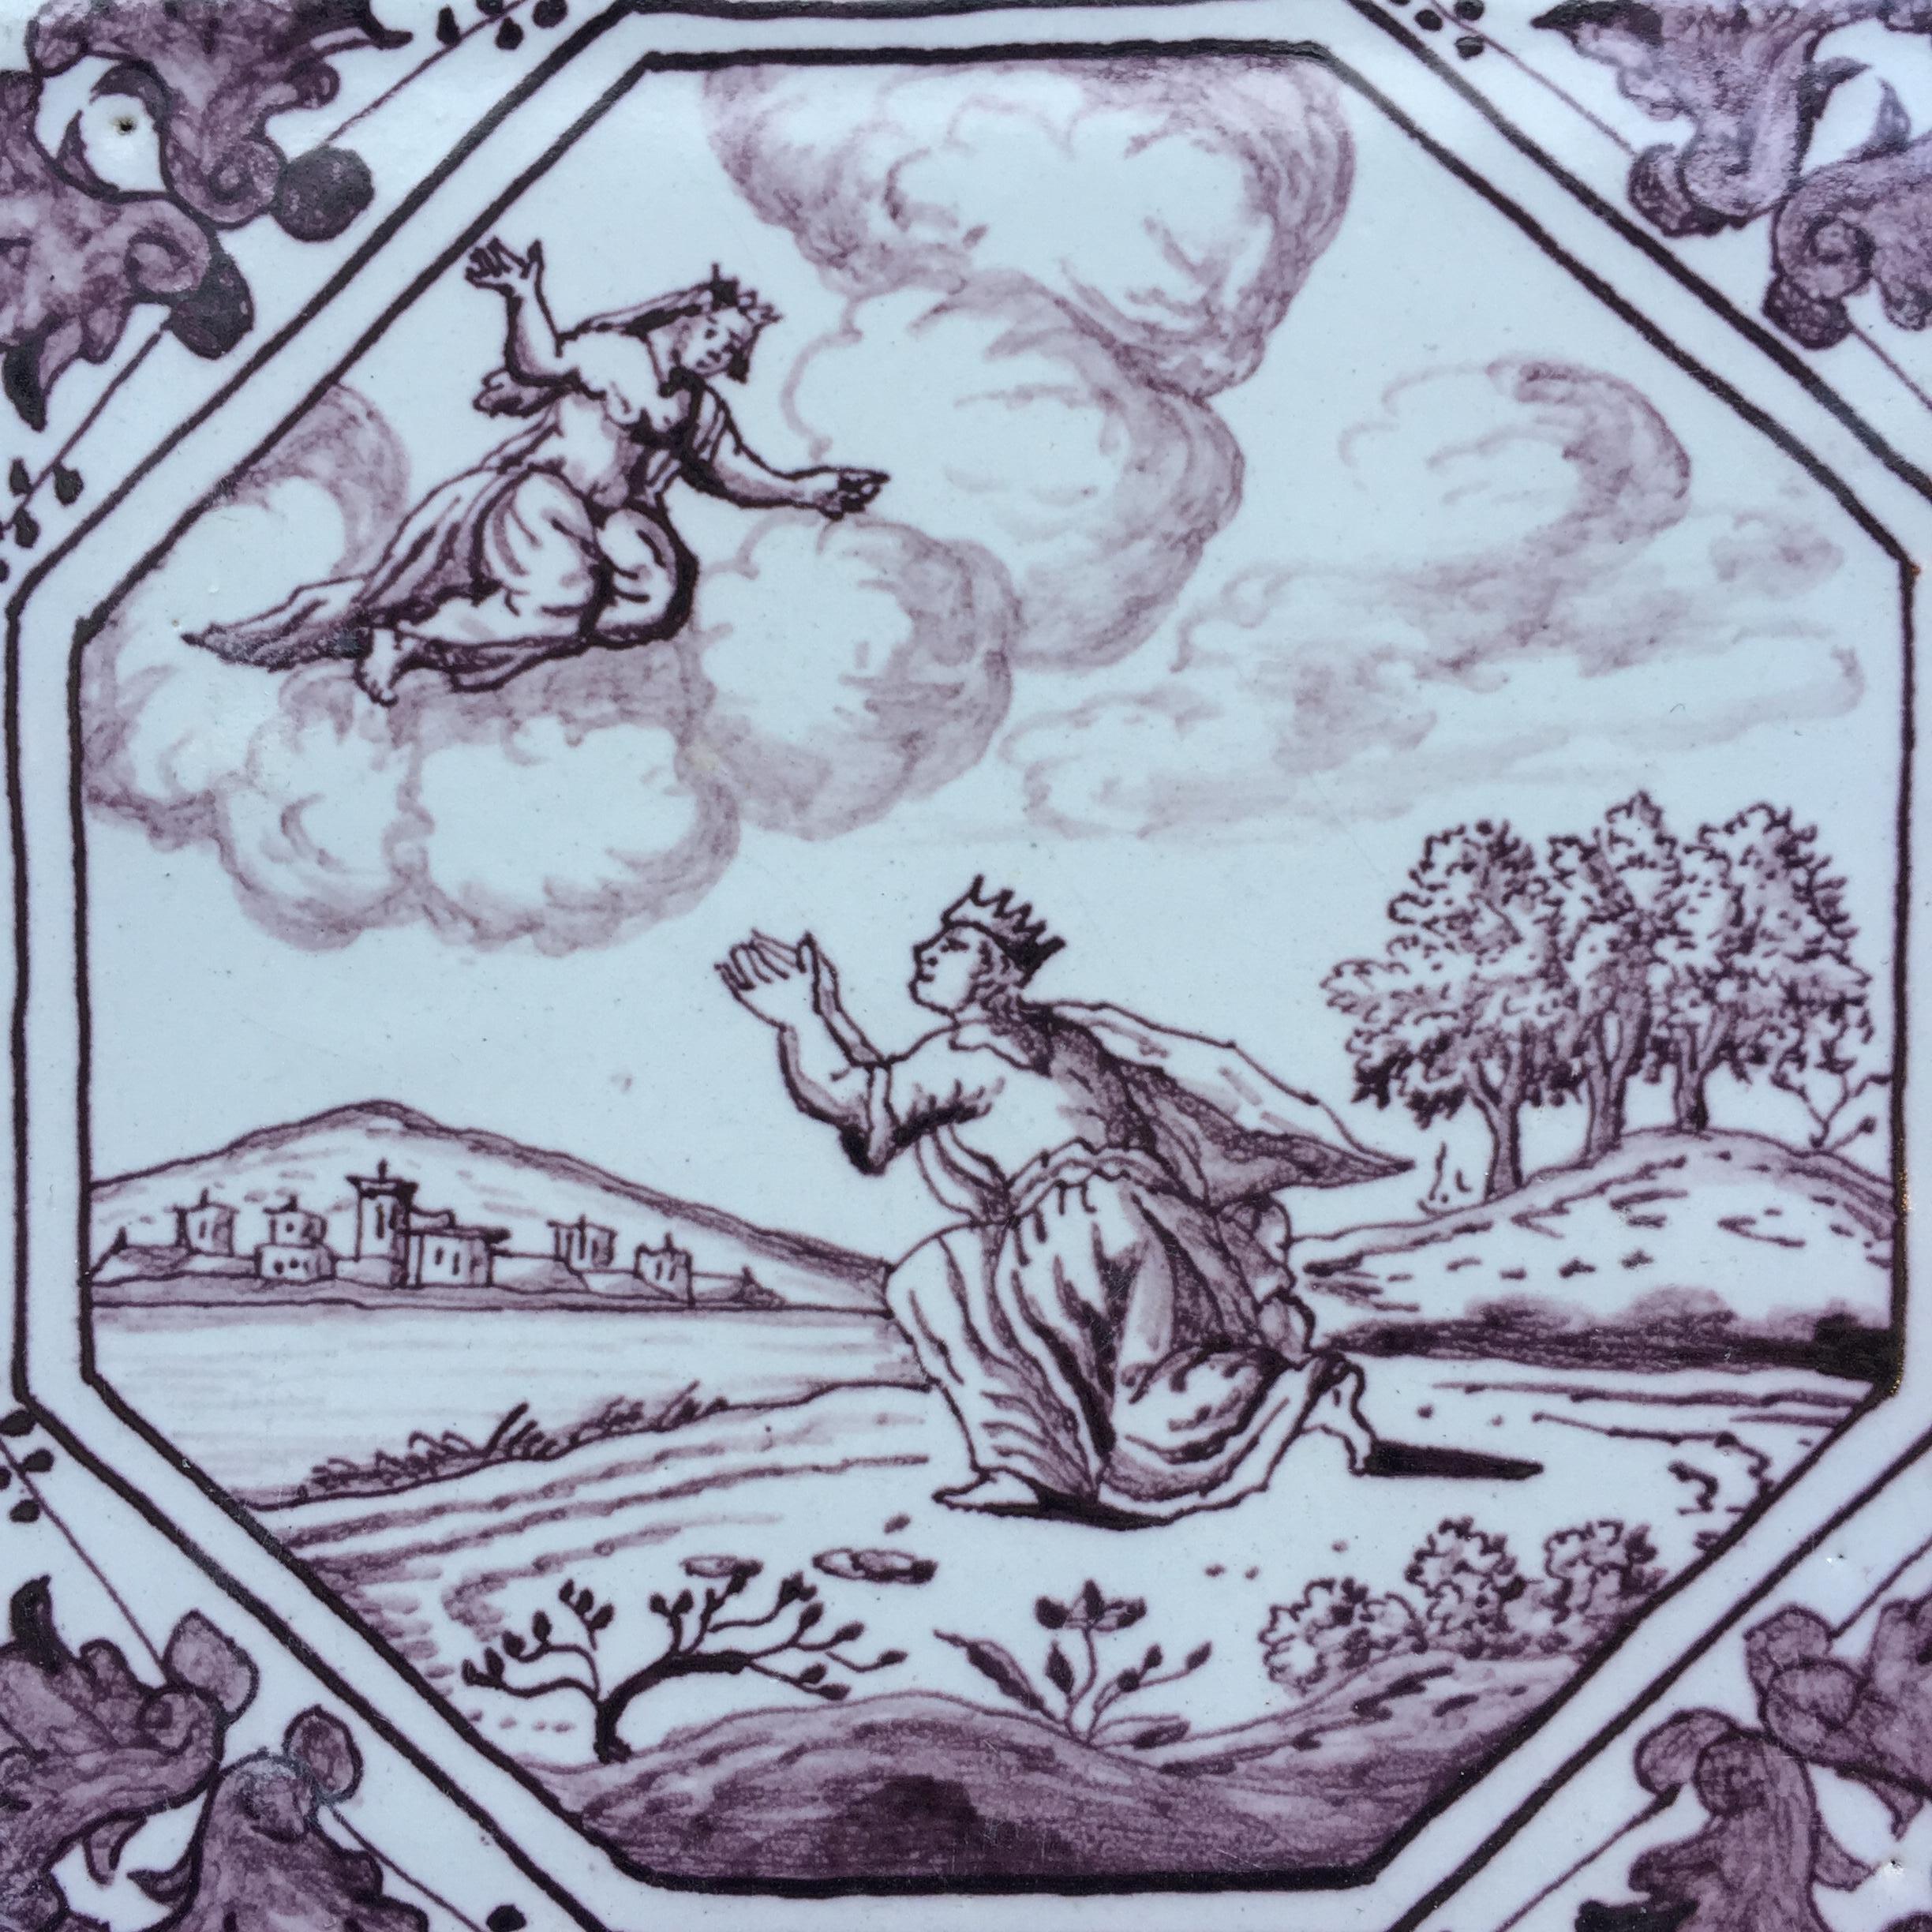 Rotterdam
C. 1740
Workshop of Hendrick Schut

A very fine painted tile with mythological decoration after Ovidius.
What is special is that this tile has a decoration from Roman mythology, which is not related to the Greek, like all the other stories